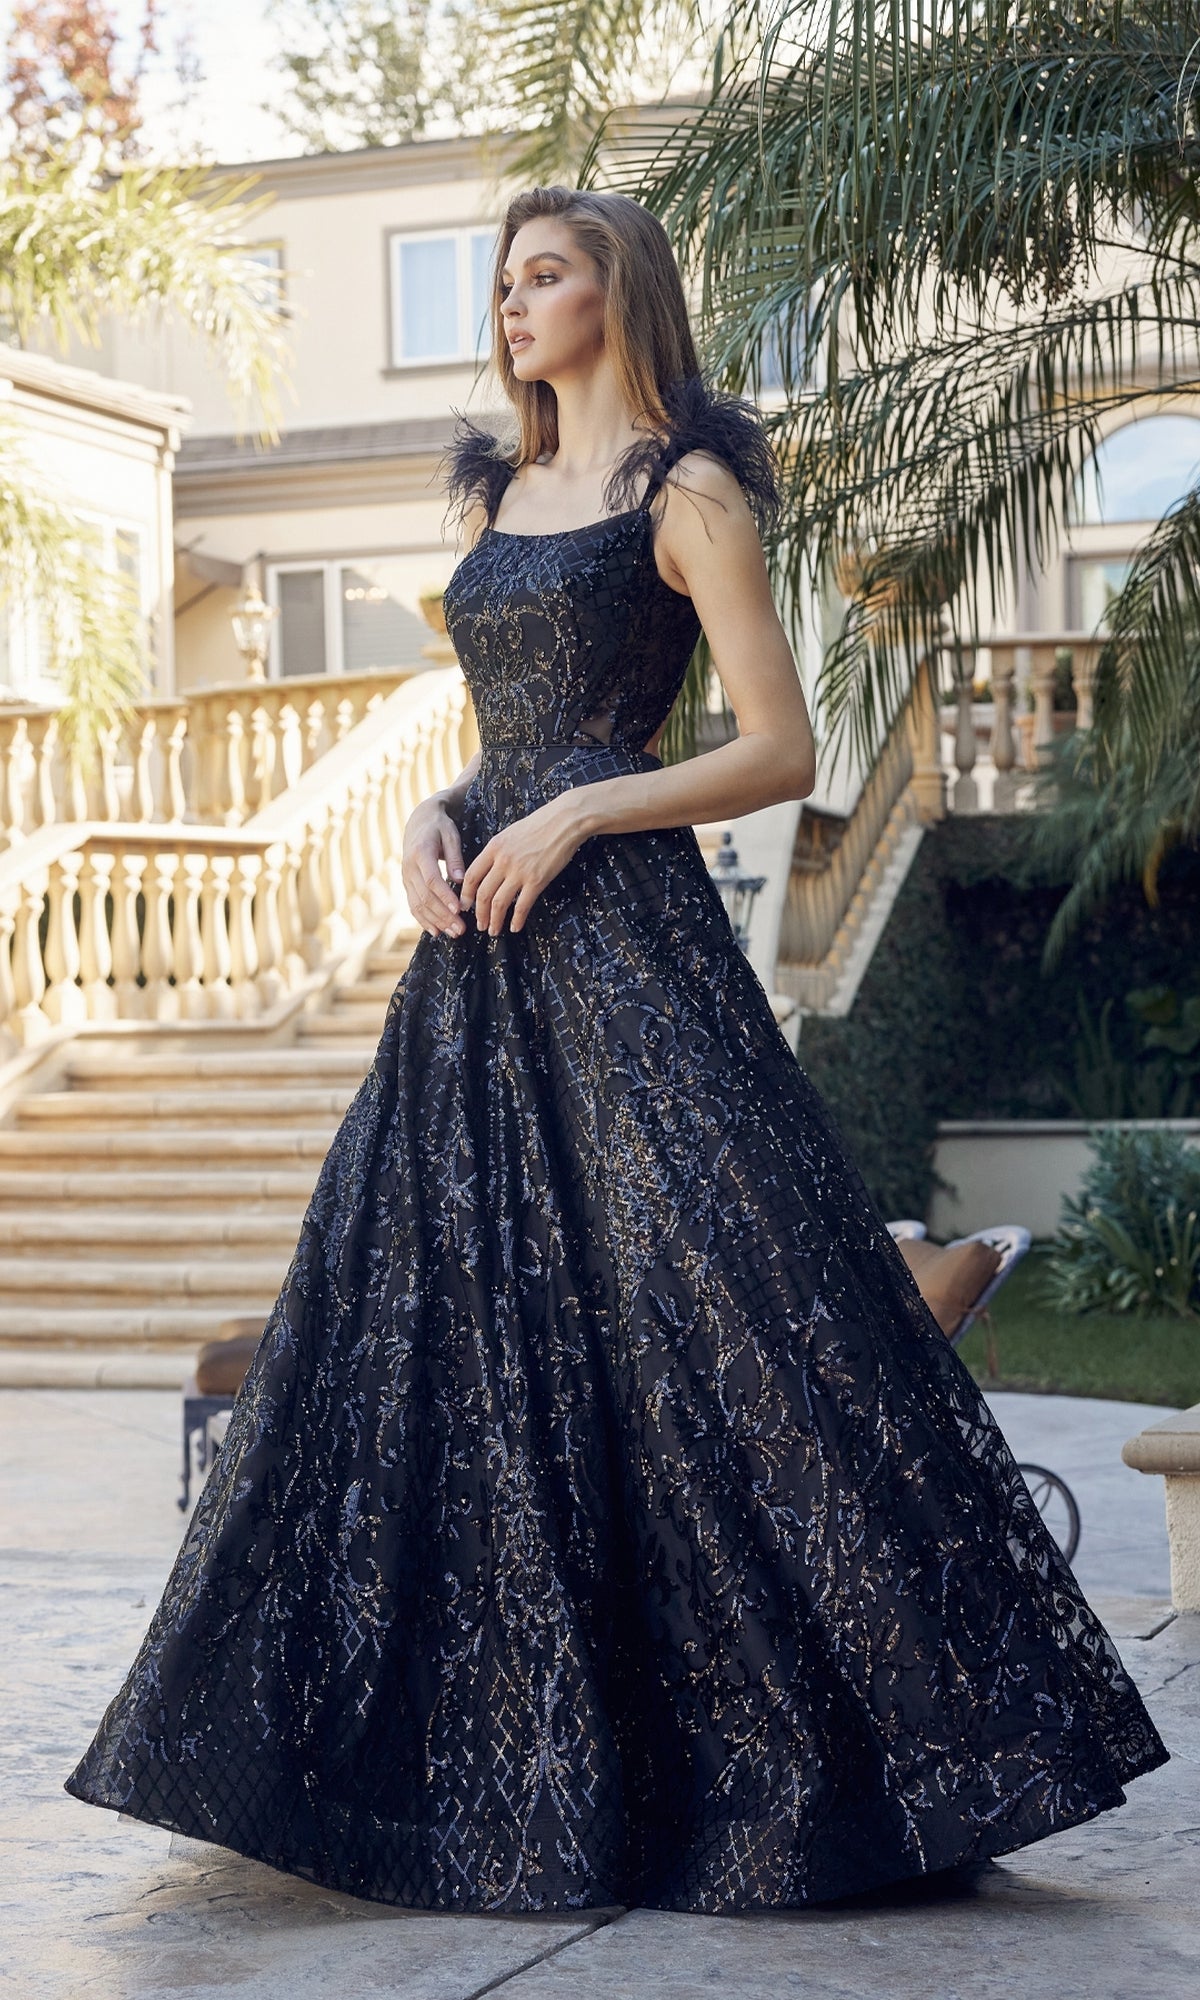 Fancy Black Ball Gown 297 with Feather Straps